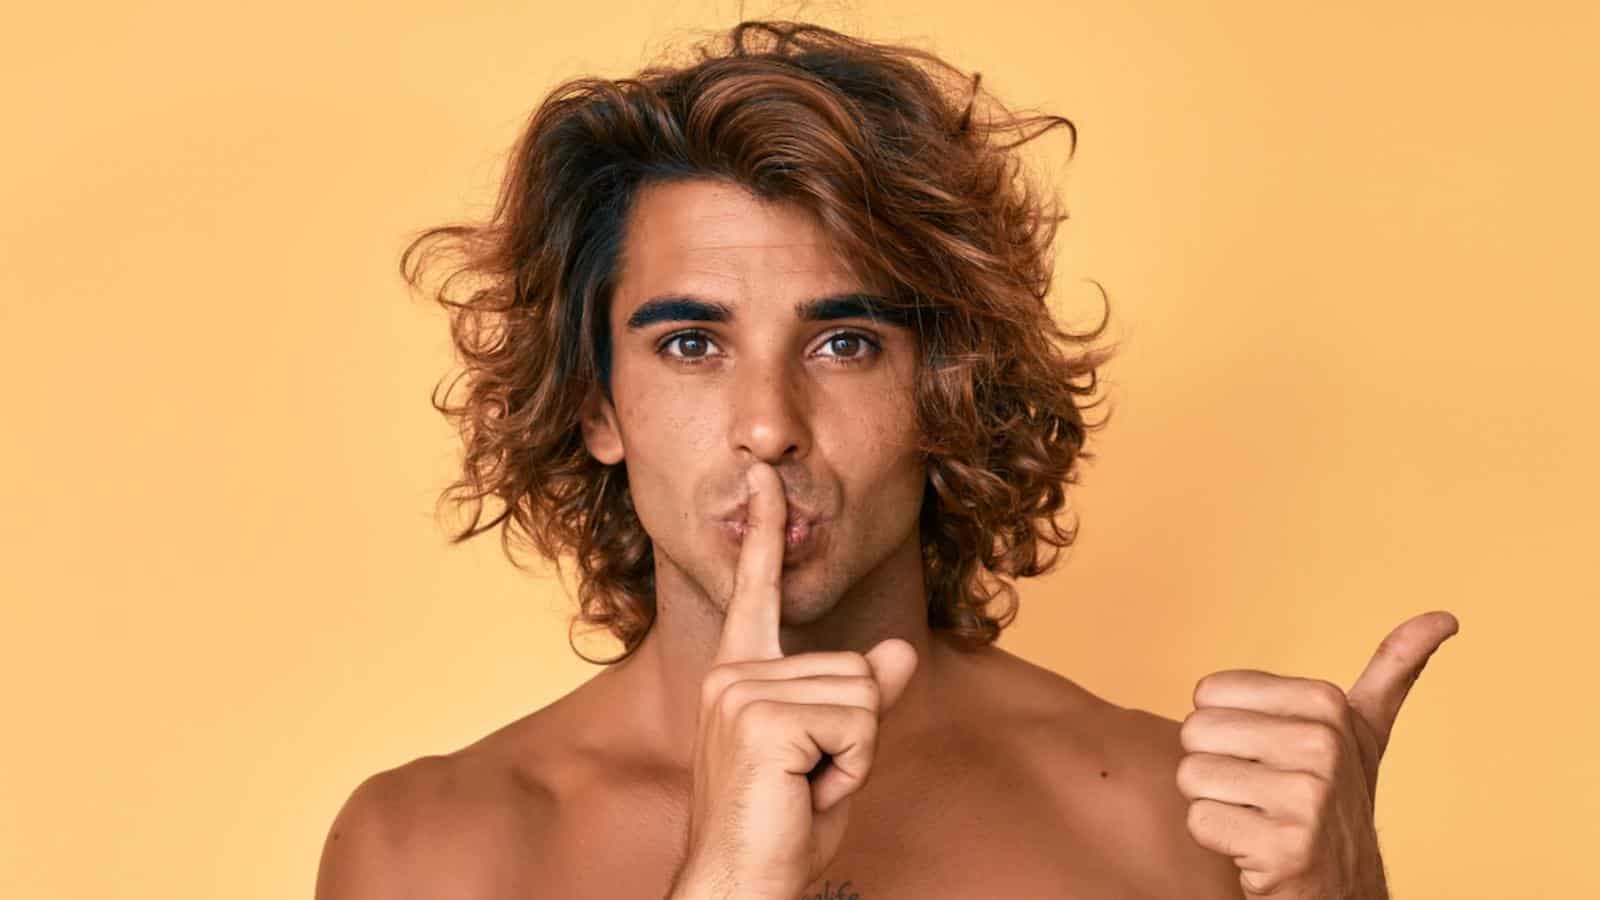 <p><span>Have you ever wondered what men really think or do? Then look no further. A recent internet survey asked, “What are some ‘guy secrets’ girls don’t know about?” Here are the top 16 answers:</span></p><p><strong><a href="https://www.lovedbycurls.com/lifestyle/secrets-men-have-but-wont-share-with-women/">16 THINGS MEN KNOW (BUT WILL NEVER REVEAL TO THE LADIES)</a></strong></p>